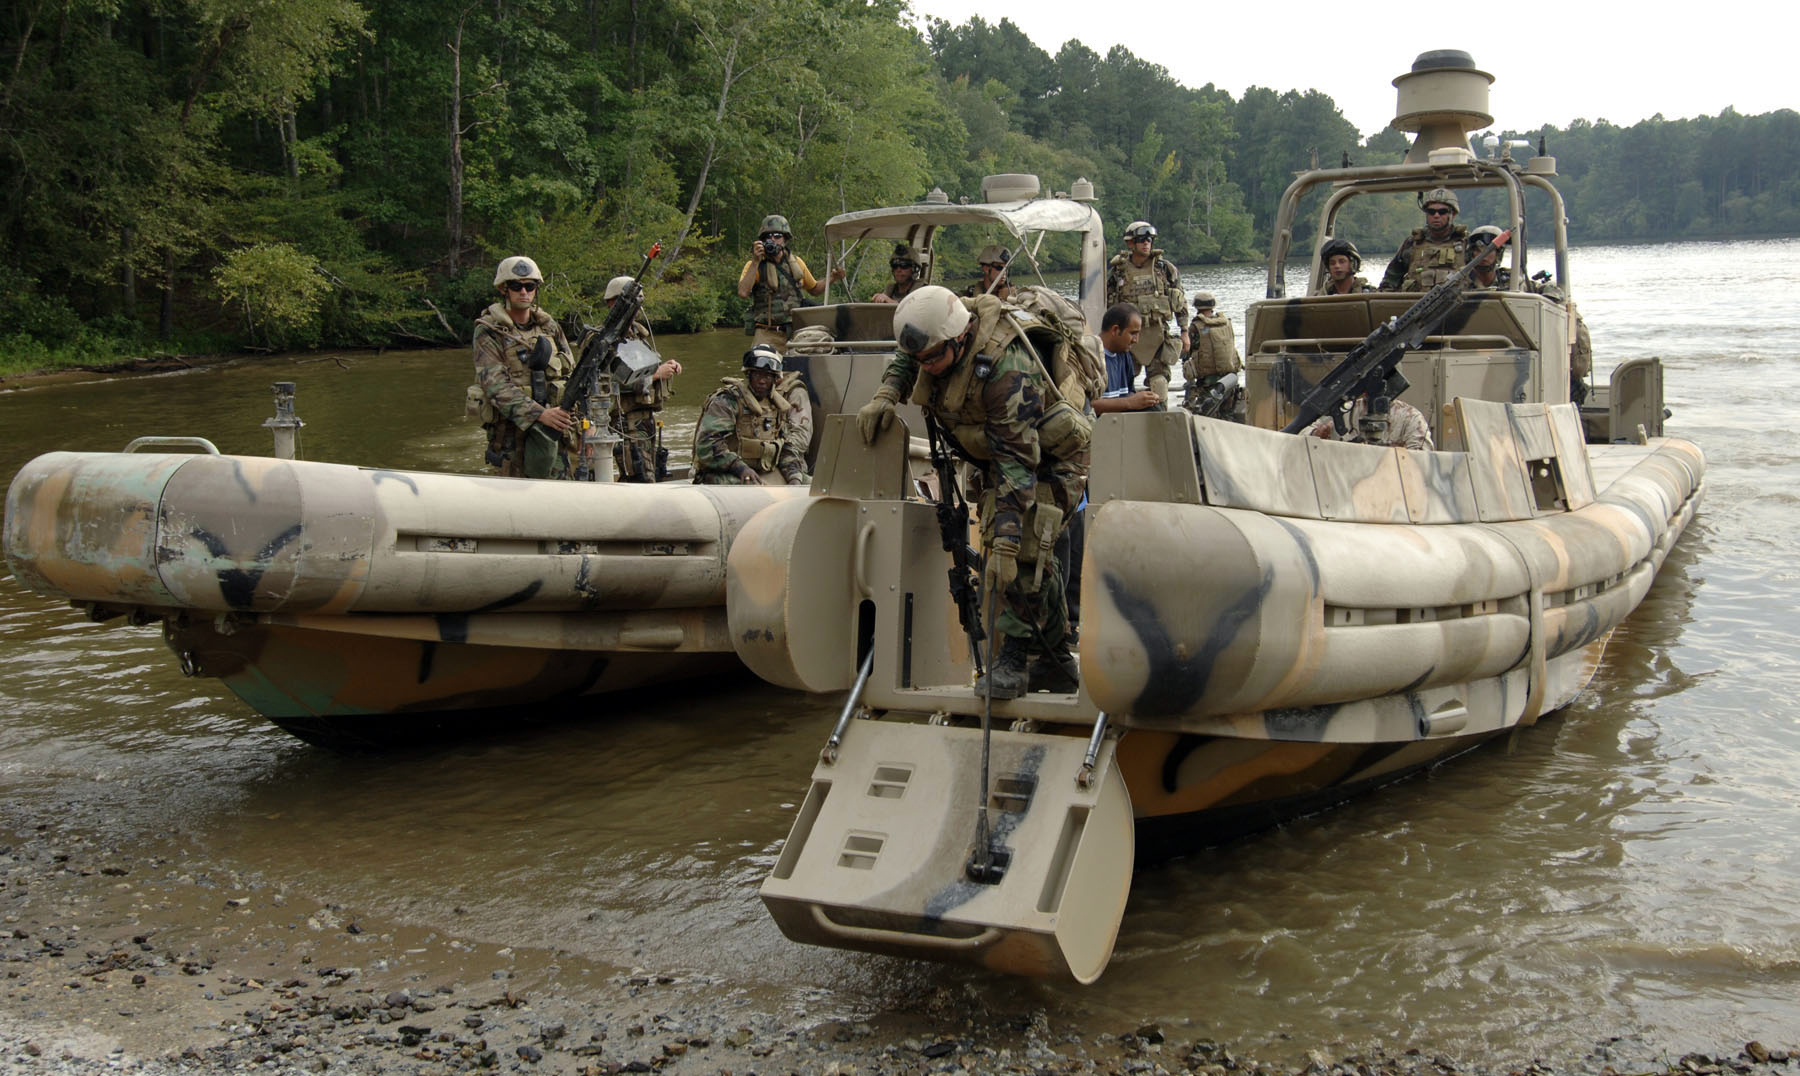 US_Navy_070910-N-6639M-043_Sailors_assigned_to_Riverine_Squadron_(RIVRON)_2_come_ashore_with_two_simulated_detainees_to_be_turned_over_to_Mobile_Security_Squadron_3,_Det._33,_during_COMET_2007.jpg